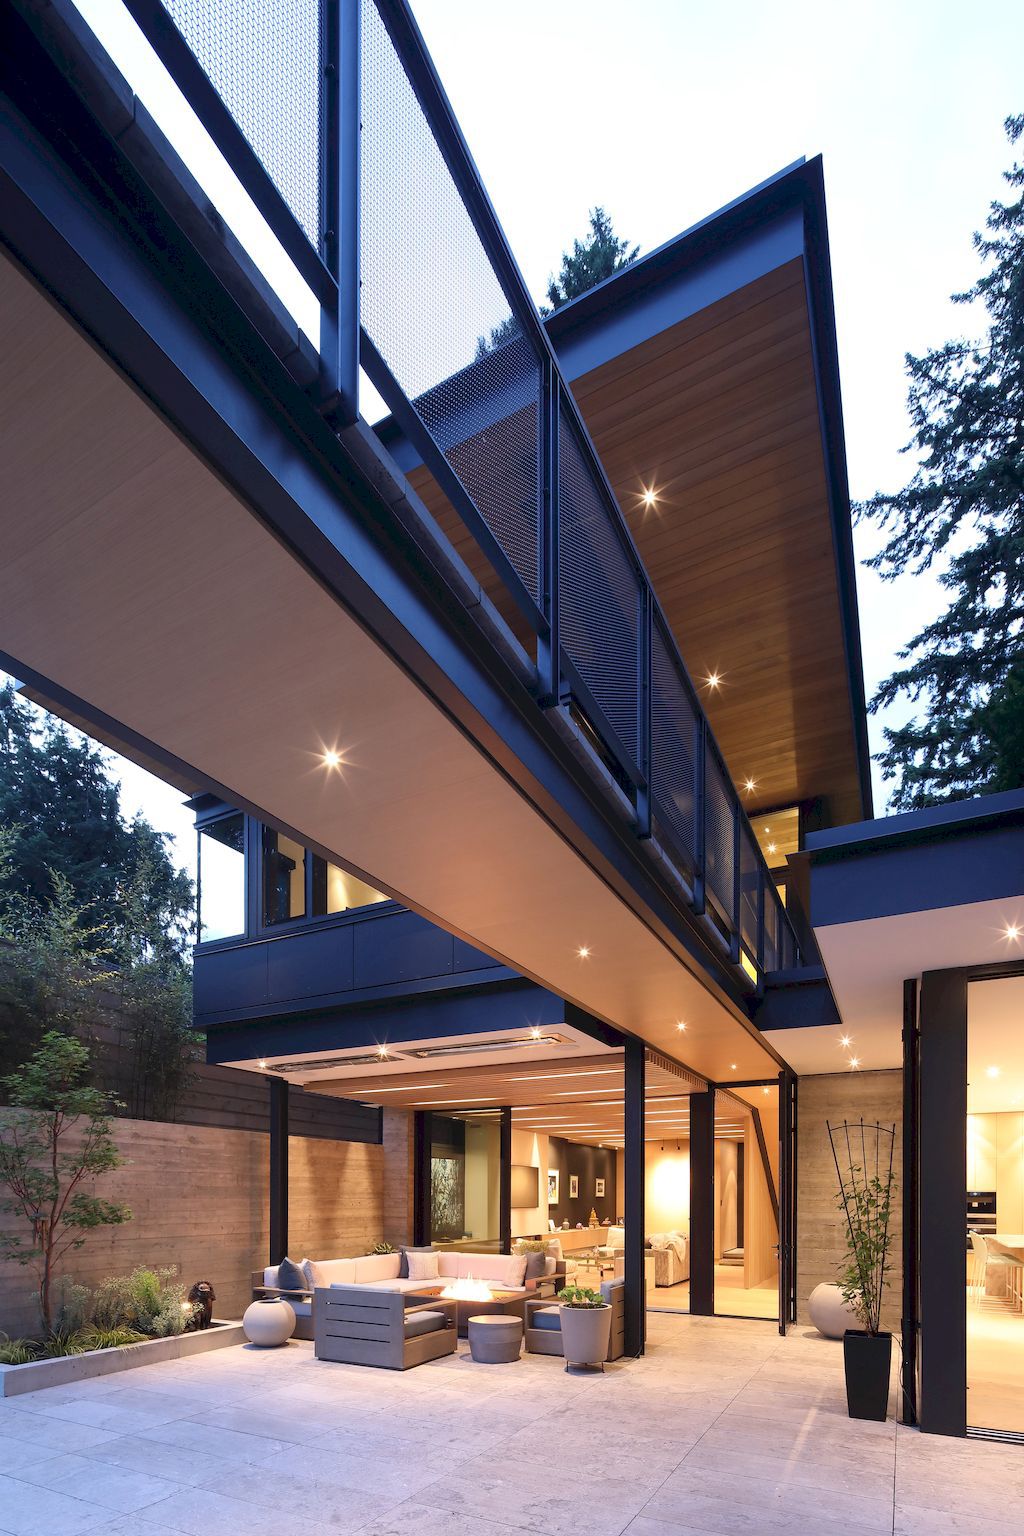 The Bridge House with Modern Aesthetic by Vallely Architecture